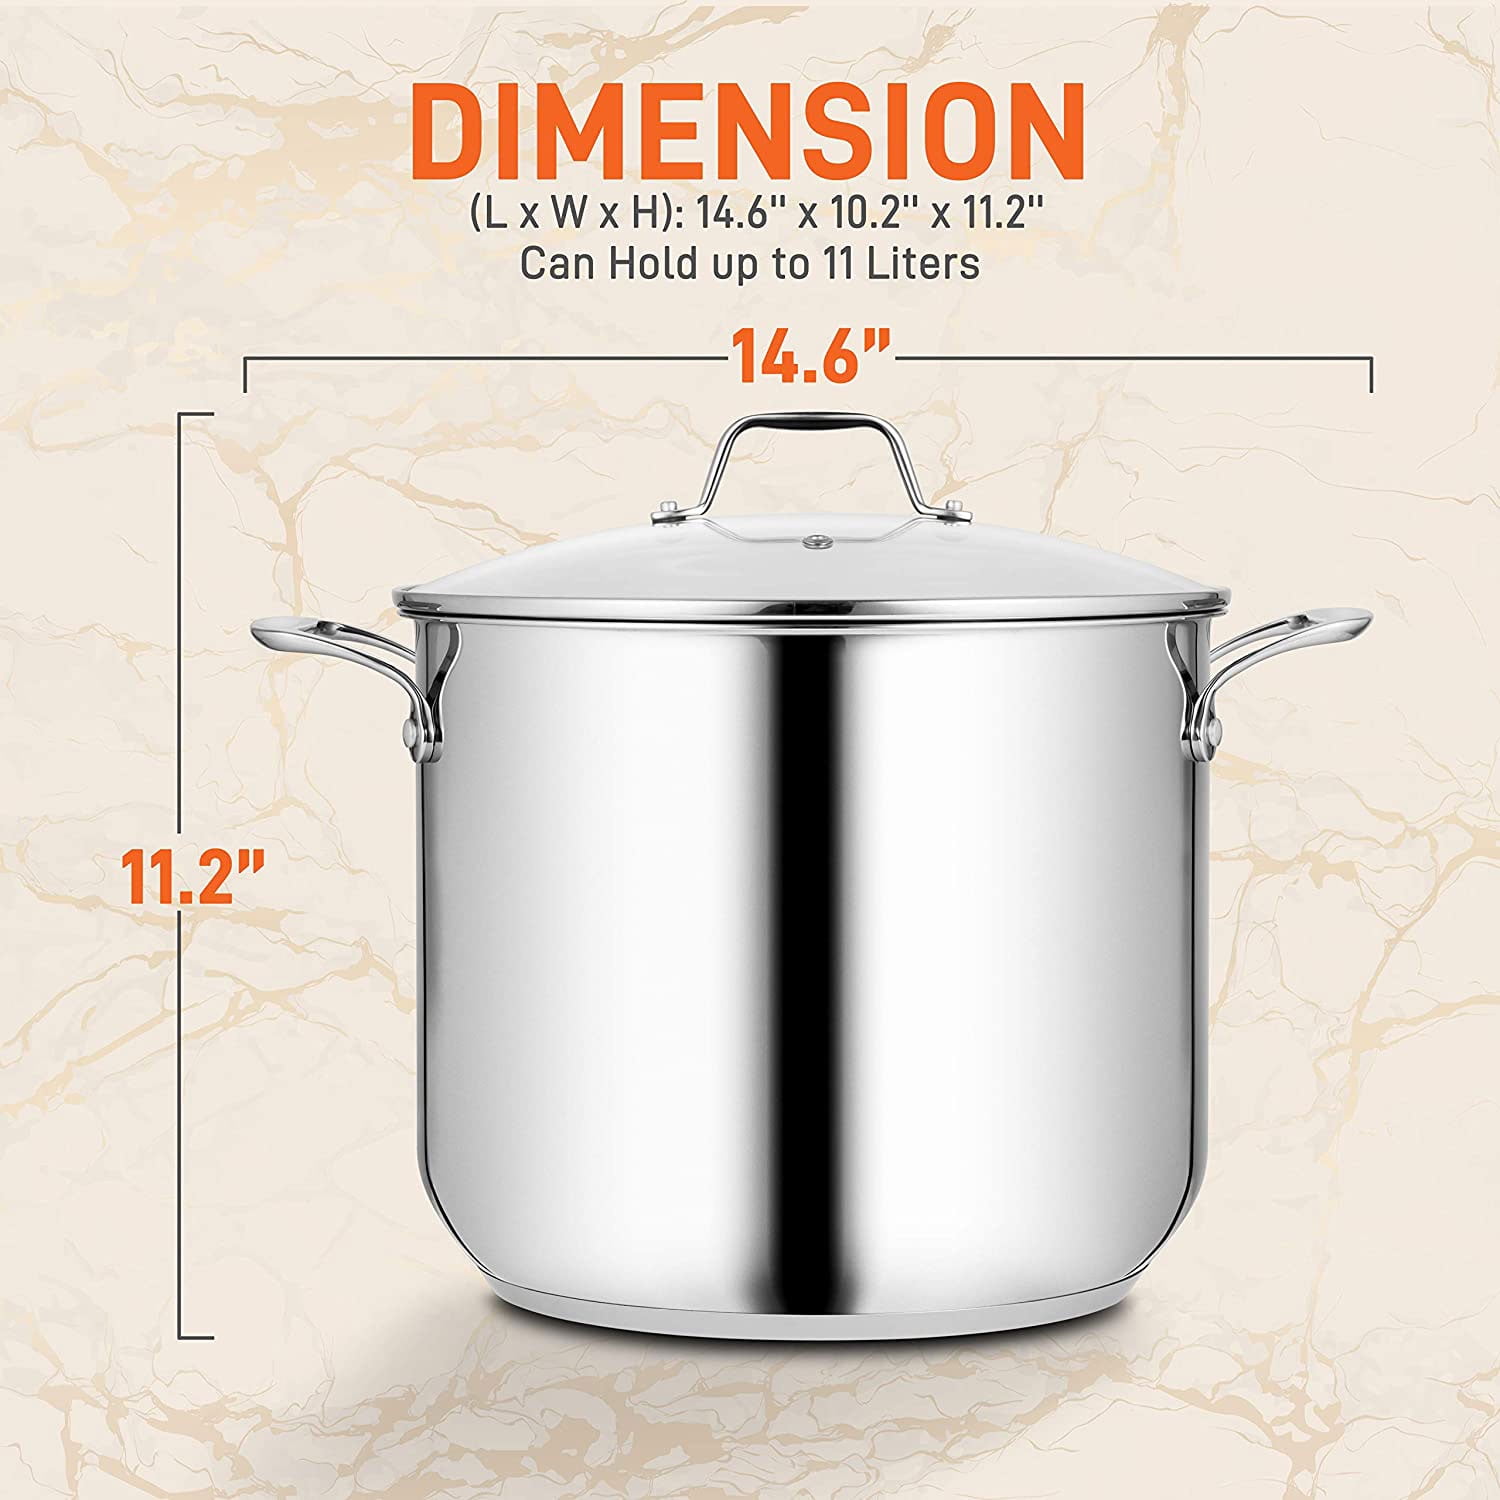 Gourmet Edge 12-quart 18/10 Stainless Steel Stock Pot with Cover - 20164629